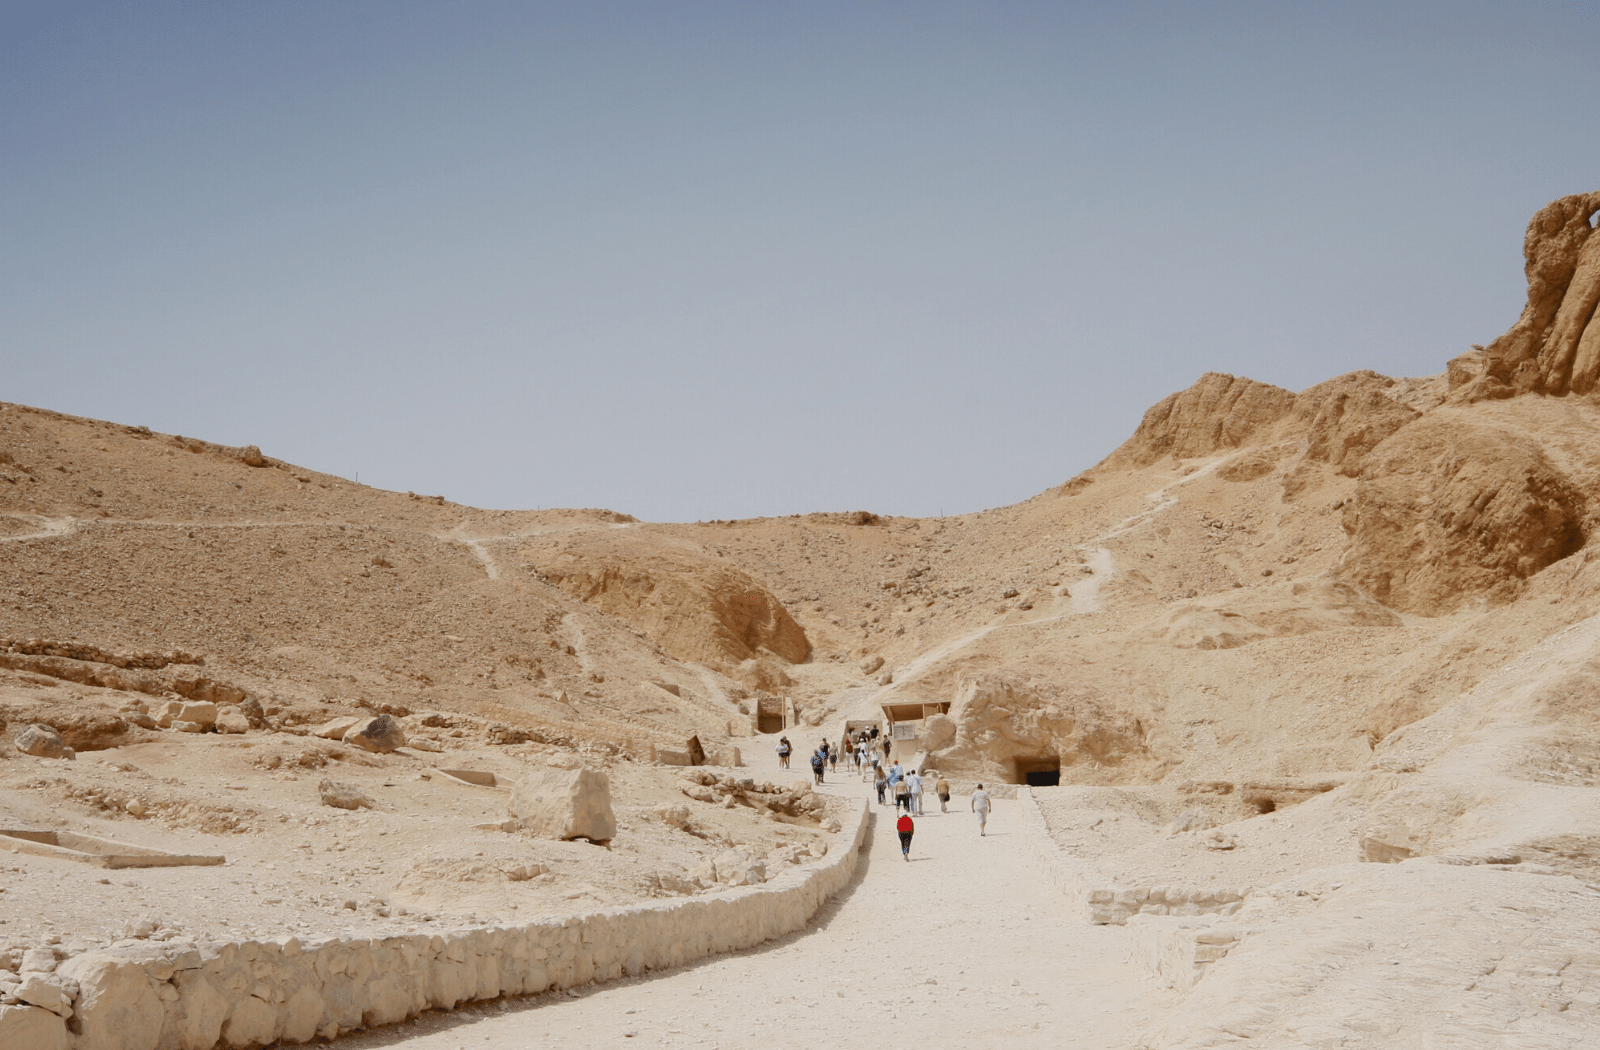 Entrance to the Valley of the Queens